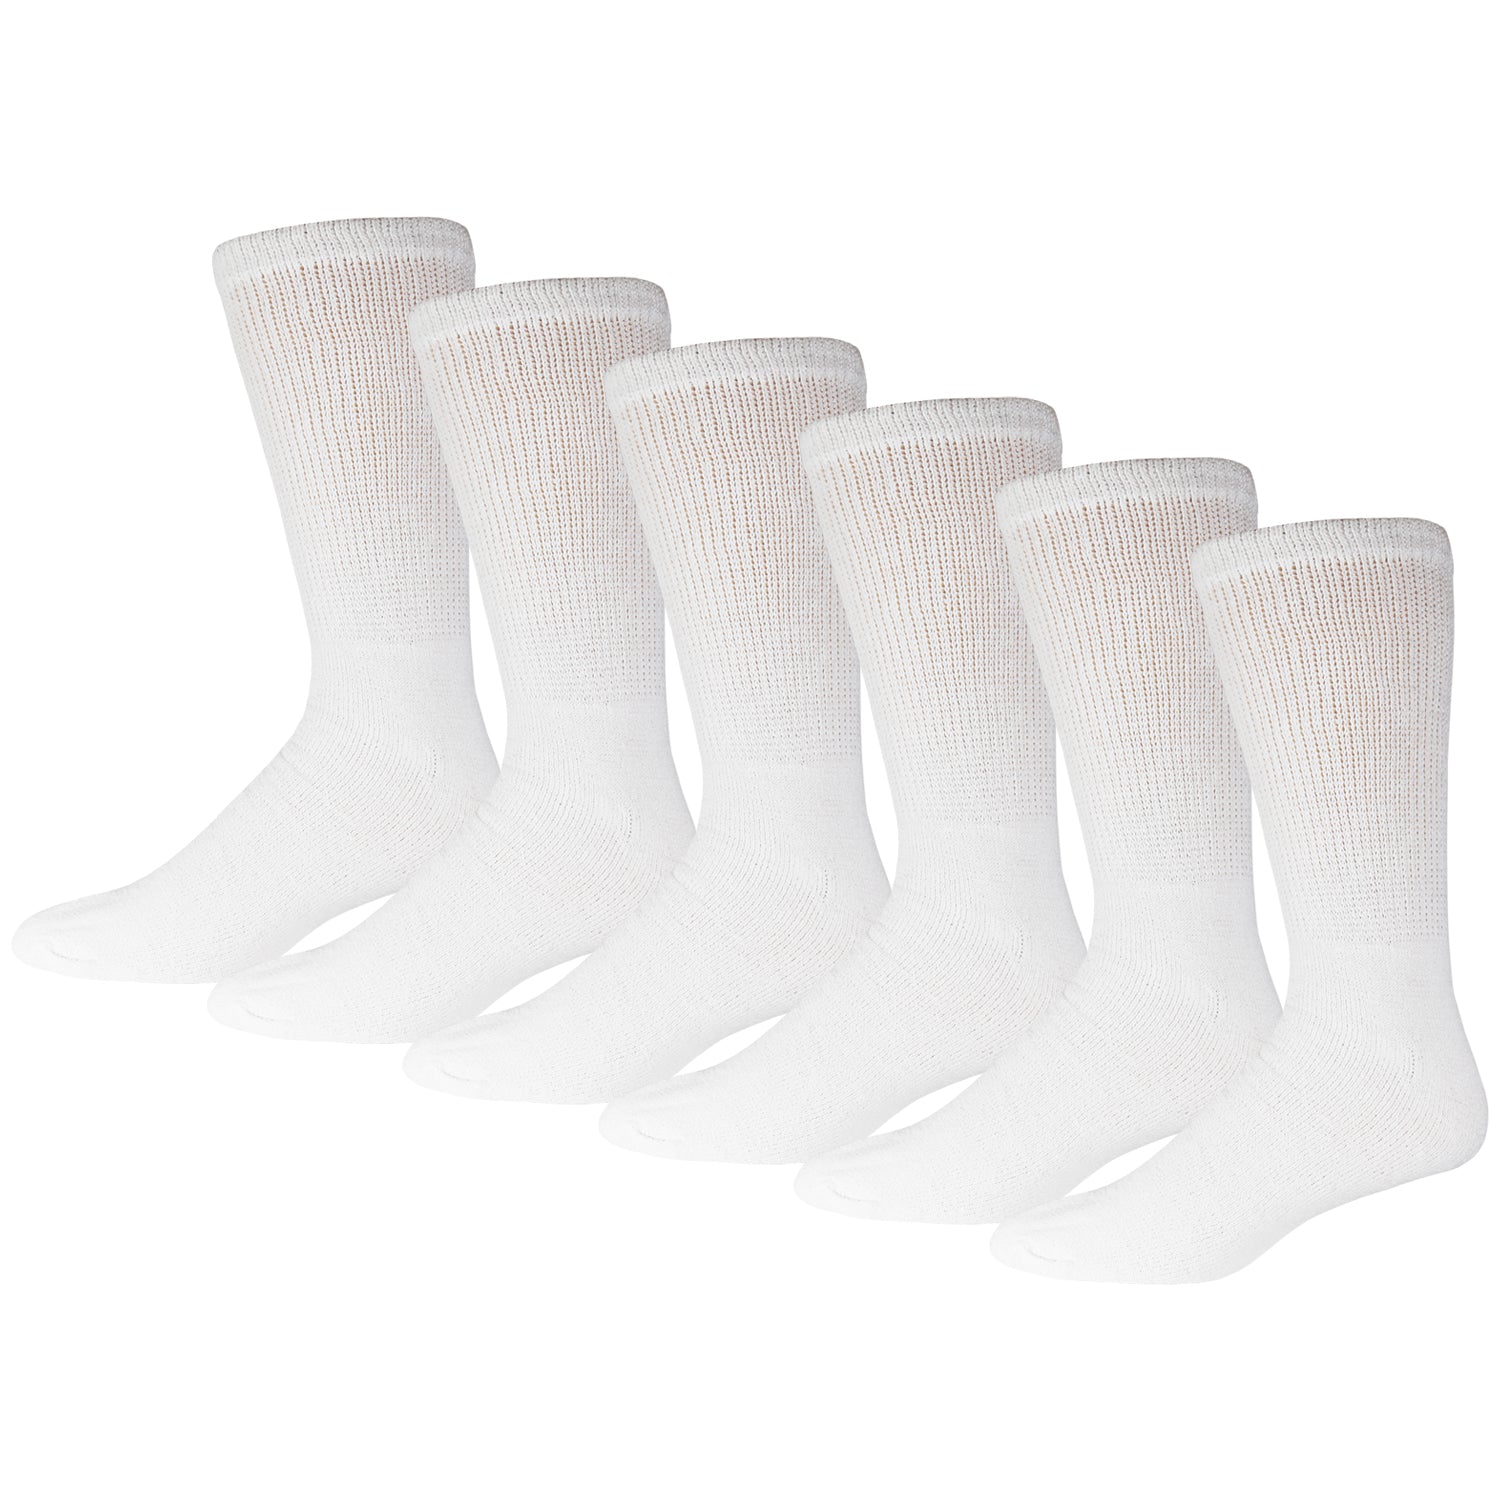 White Diabetic Socks Of Crew Length With Loose Top 6 Pack